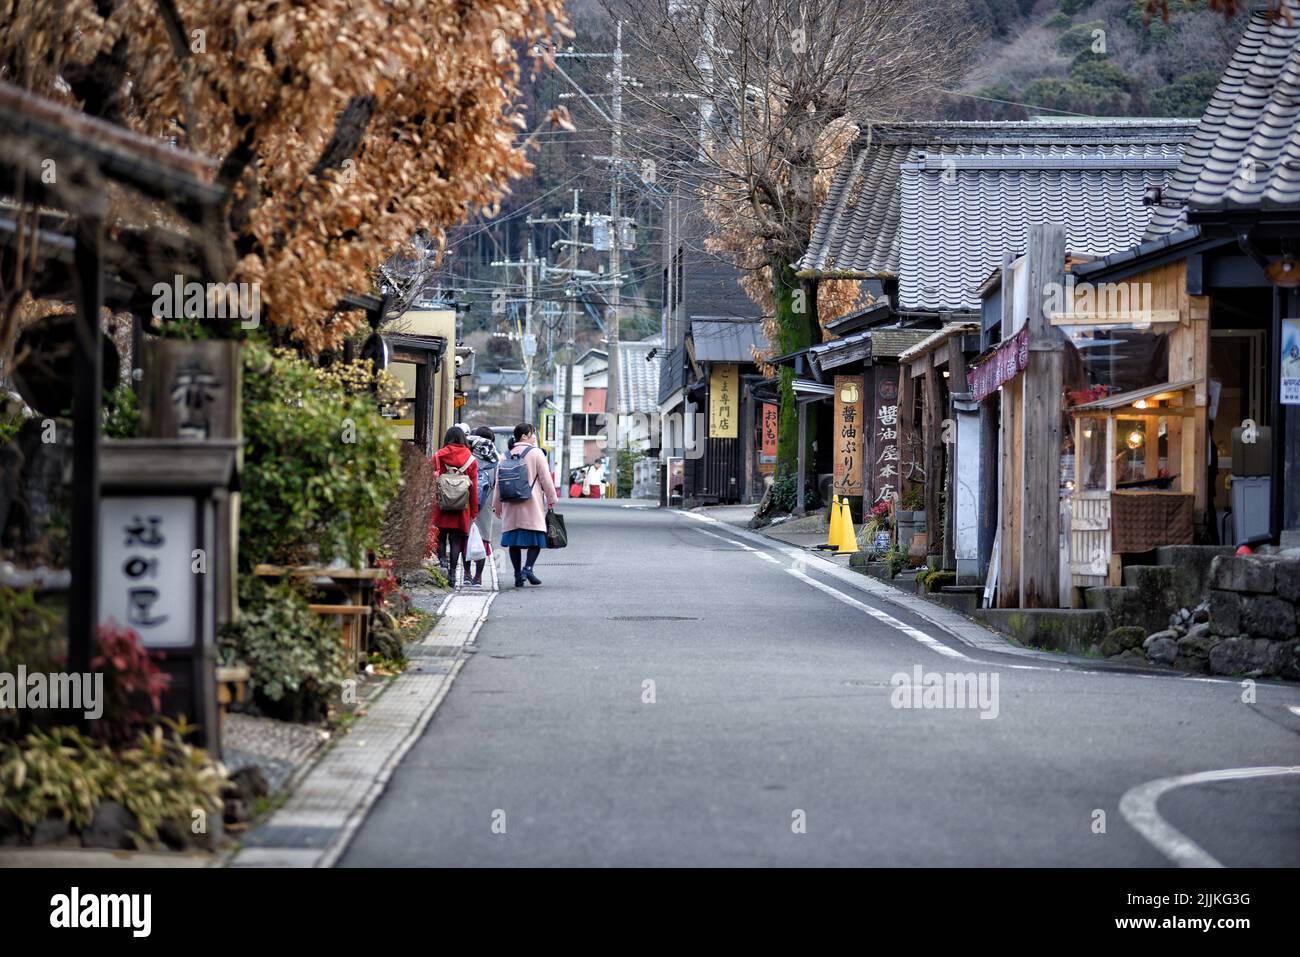 The people walking down a narrow street in Yufuin, Japan Stock Photo